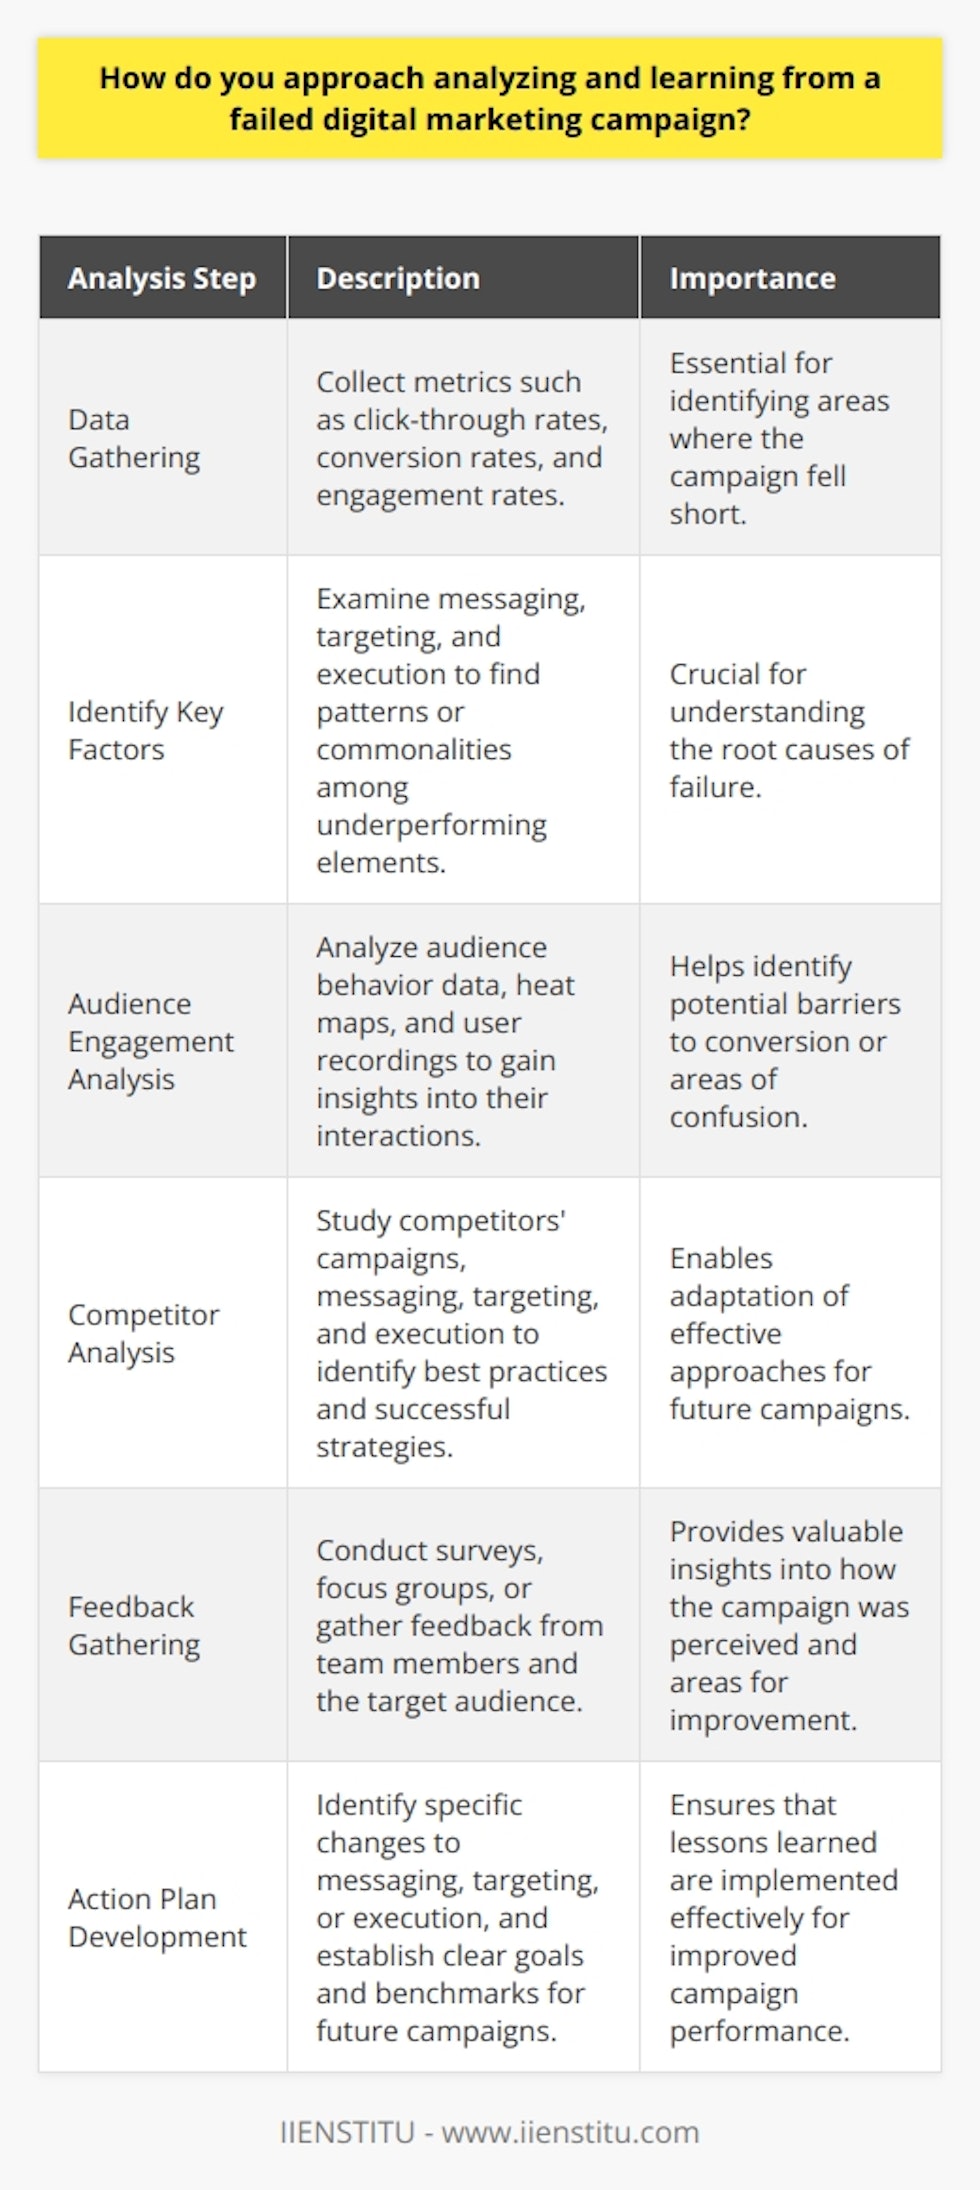 Analyzing and learning from a failed digital marketing campaign requires a systematic and objective approach. The first step is to gather all relevant data, including metrics such as click-through rates, conversion rates, and engagement rates. This data should be compared to the campaigns goals and benchmarks to identify areas where the campaign fell short. Identify Key Factors Next, its essential to identify the key factors that contributed to the campaigns failure. This may involve examining the campaigns messaging, targeting, and execution. Look for patterns or commonalities among the underperforming elements of the campaign. Consider factors such as the ad copy, visuals, and call-to-action. Analyze Audience Engagement Analyze audience engagement and behavior data to gain insights into how the target audience interacted with the campaign. Look for signs of confusion, disinterest, or frustration. Use tools like heat maps and user recordings to understand how users navigated the campaigns landing pages and identify potential barriers to conversion. Conduct a Competitor Analysis Conduct a competitor analysis to see how other brands in the same industry approached similar campaigns. Look for best practices and successful strategies that could be adapted for future campaigns. Analyze their messaging, targeting, and execution to identify potential areas for improvement. Gather Feedback Gather feedback from the team members involved in the campaign, as well as from the target audience. Conduct surveys or focus groups to gain insights into how the campaign was perceived and what could be improved. Use this feedback to inform future campaign planning and execution. Develop an Action Plan Finally, develop an action plan based on the insights gained from the analysis. Identify specific changes that can be made to improve future campaigns. This may involve adjusting the messaging, targeting, or execution of the campaign. Set clear goals and benchmarks for future campaigns, and establish a process for continuous monitoring and optimization. Embrace Failure as a Learning Opportunity Remember, failure is a natural part of the learning process. Embrace it as an opportunity to grow and improve. By analyzing and learning from failed campaigns, marketers can develop more effective strategies and tactics for future success.